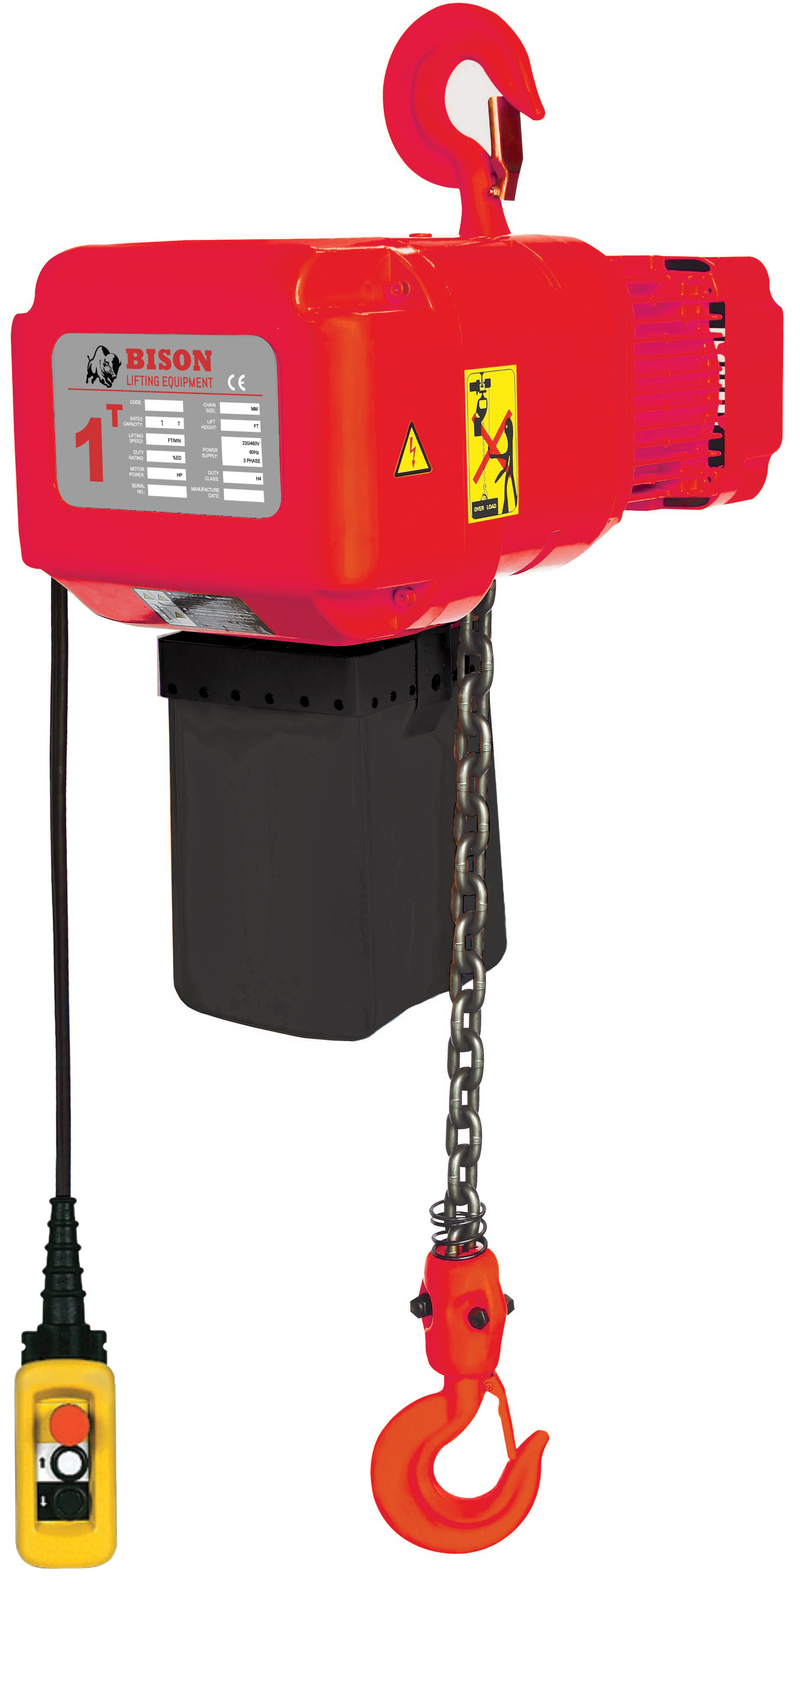 1 ton Electric Chain Hoist - Bison Lifting - Single Speed, Three Phase, 20' Lift